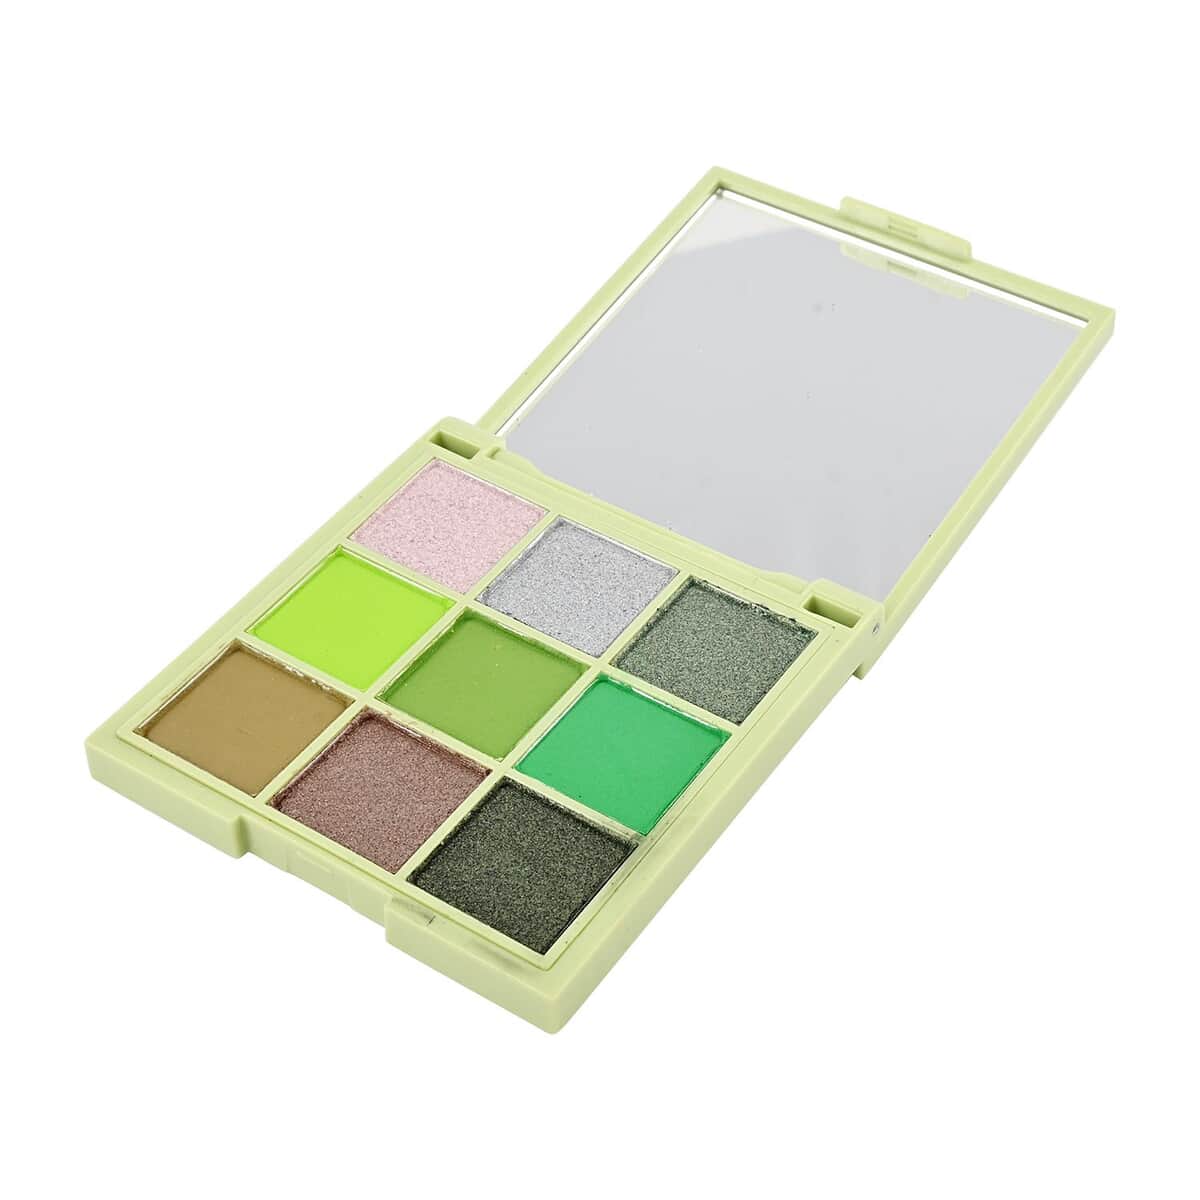 CookieFace Cosmetics- Green Goddess Cookie Couture Eye Shadow Palette and Beauty Beats Set , Makeup Beauty Set , Eyebrow Kit , Makeup Gift Sets Kit Box image number 3